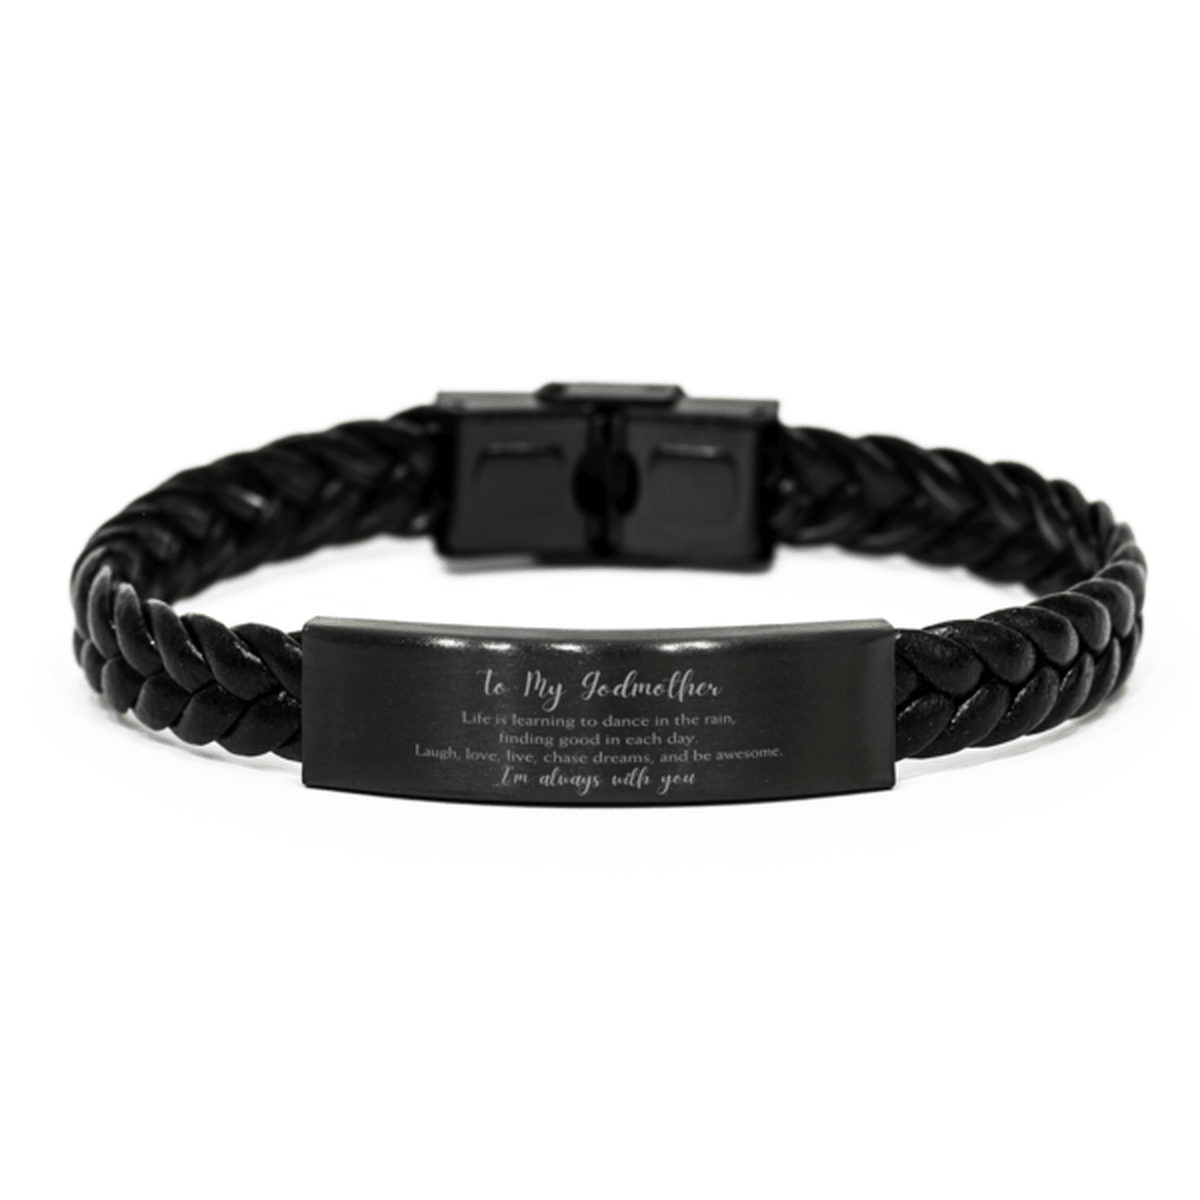 Godmother Christmas Perfect Gifts, Godmother Braided Leather Bracelet, Motivational Godmother Engraved Gifts, Birthday Gifts For Godmother, To My Godmother Life is learning to dance in the rain, finding good in each day. I'm always with you - Mallard Moon Gift Shop